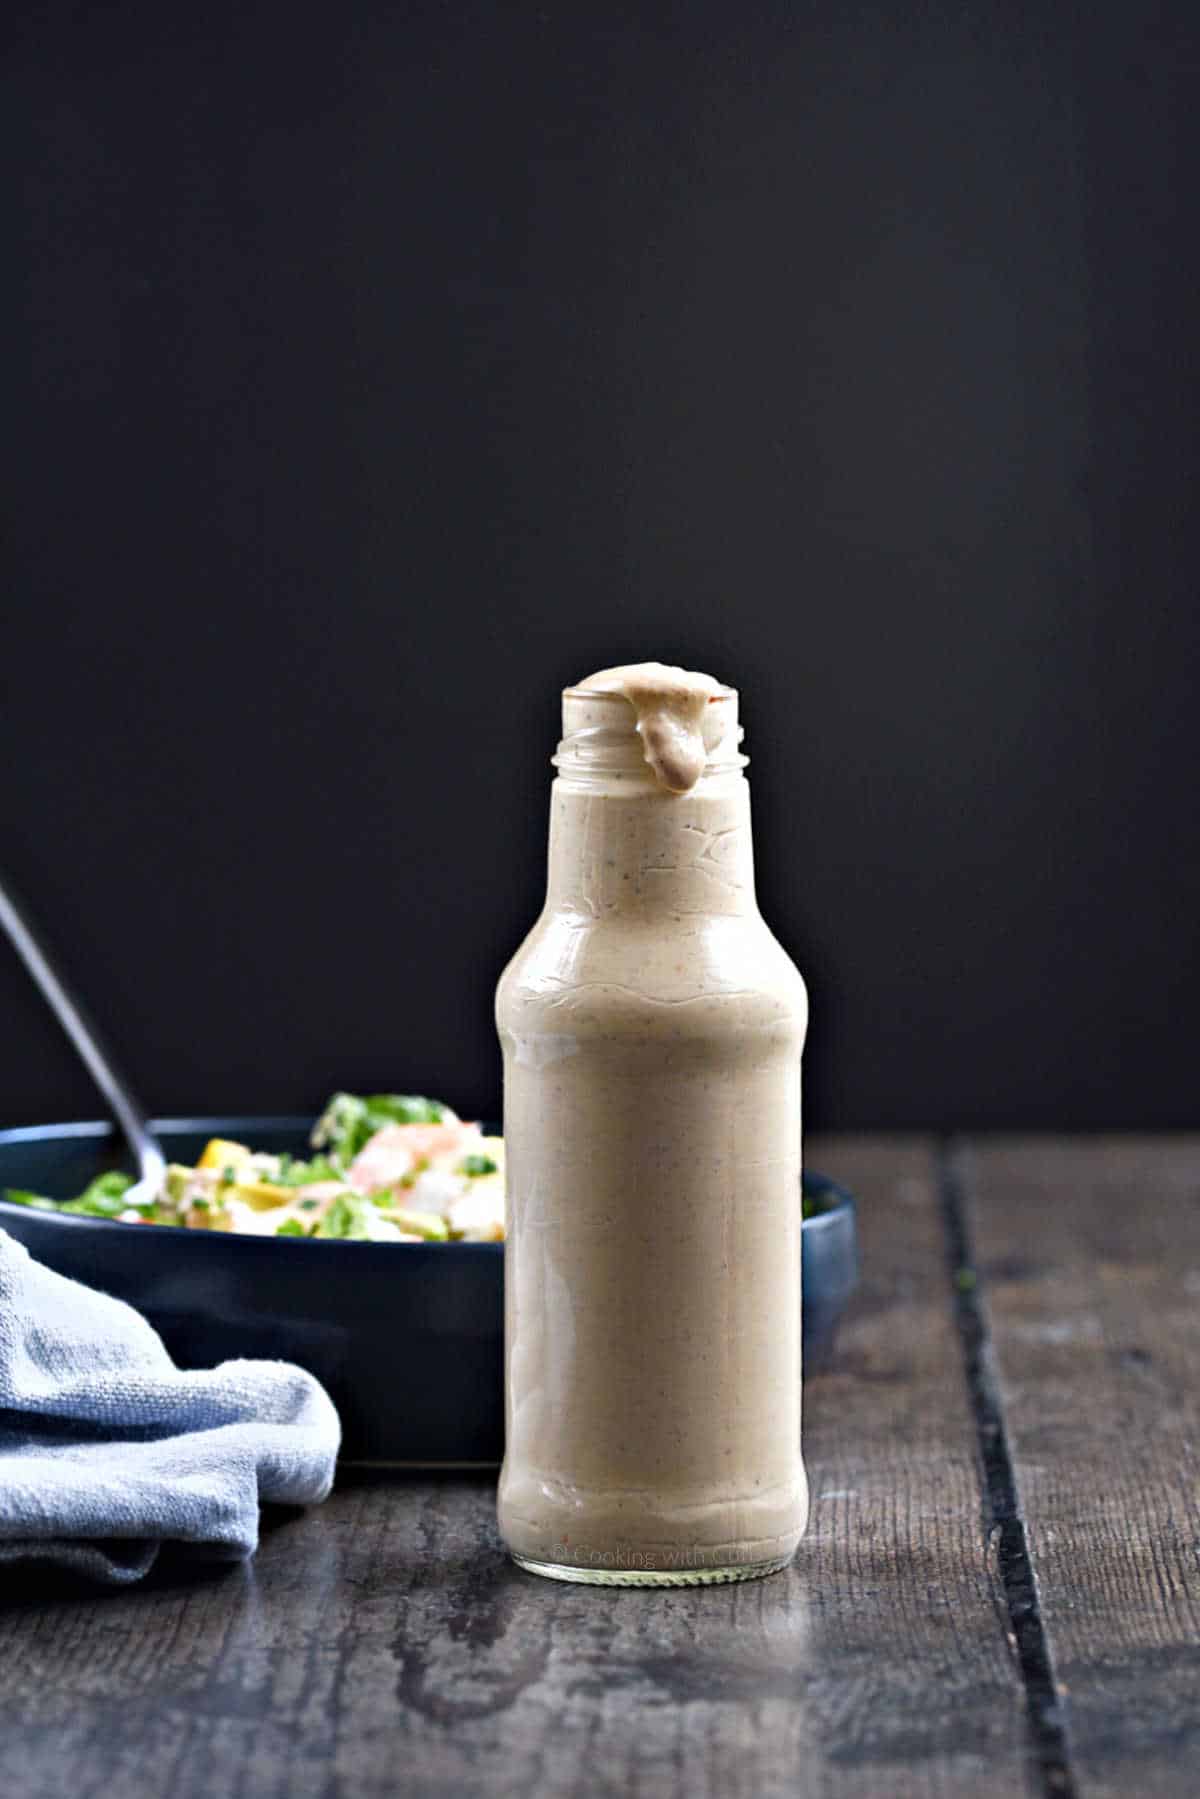 A bottle of thousand island dressing with a bowl of salad in the background.